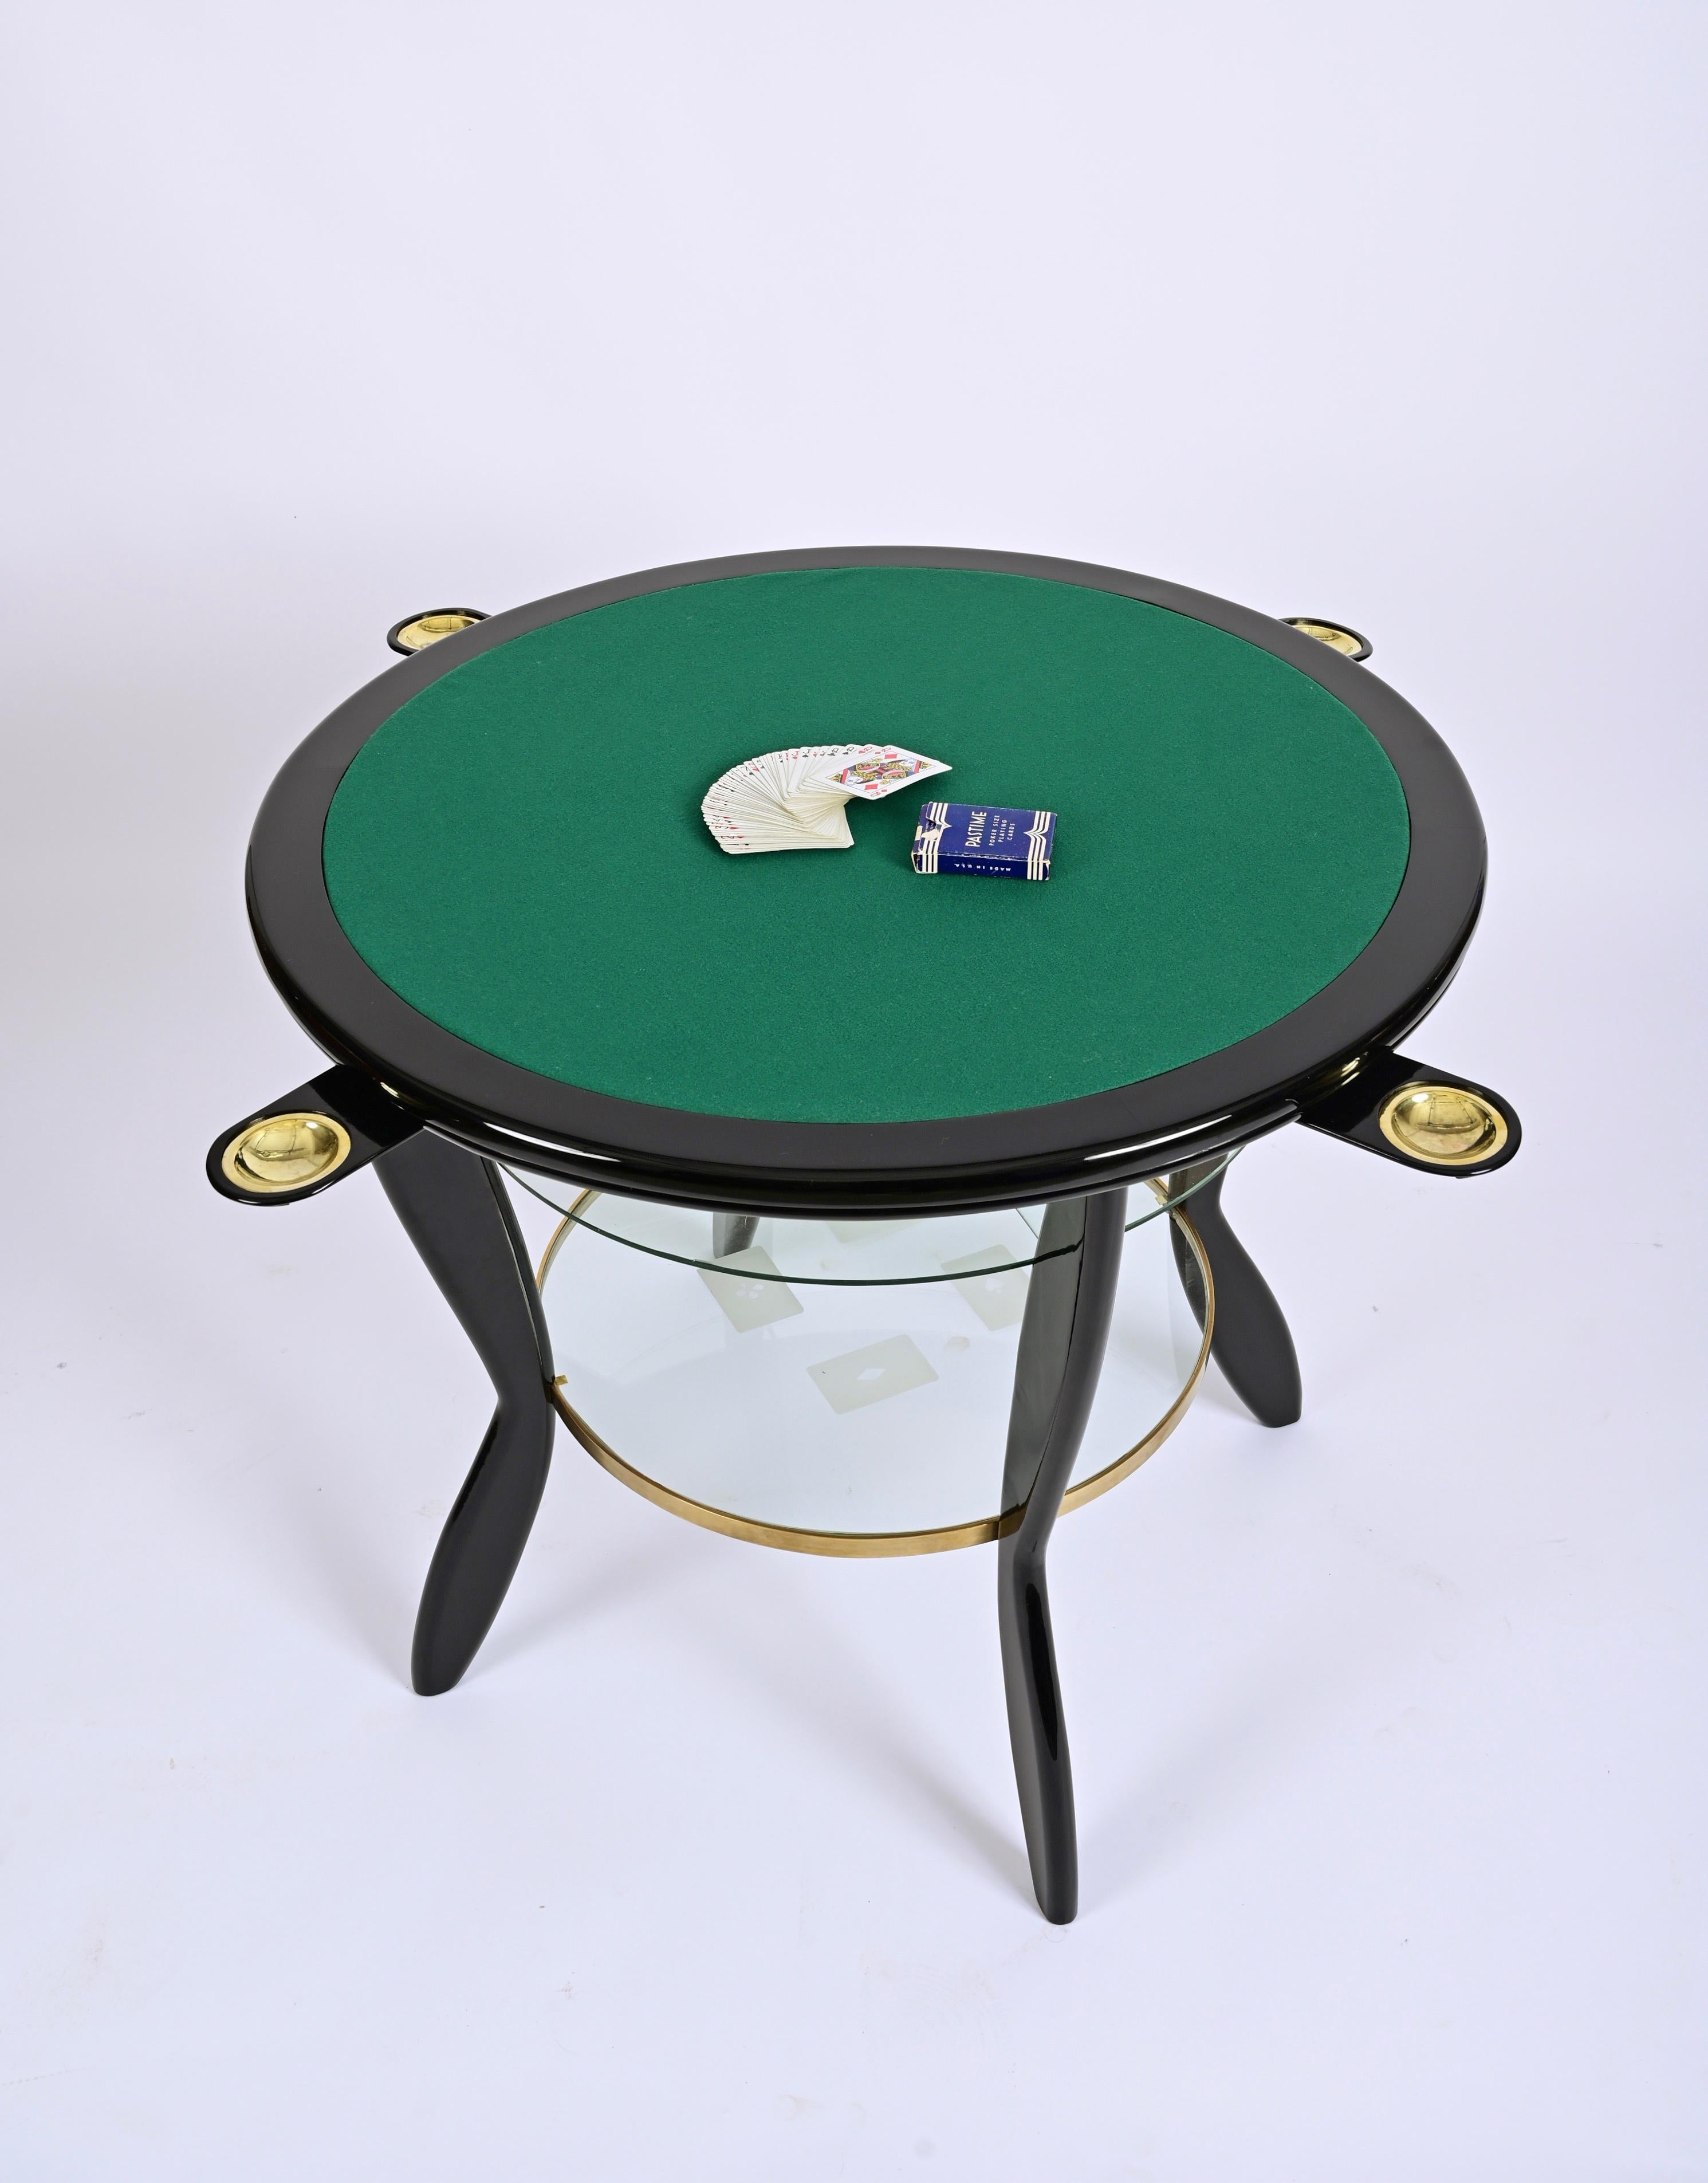 Gio Ponti Style Ebonized Beech and Brass Italian Game Table with Glass, 1950s For Sale 9